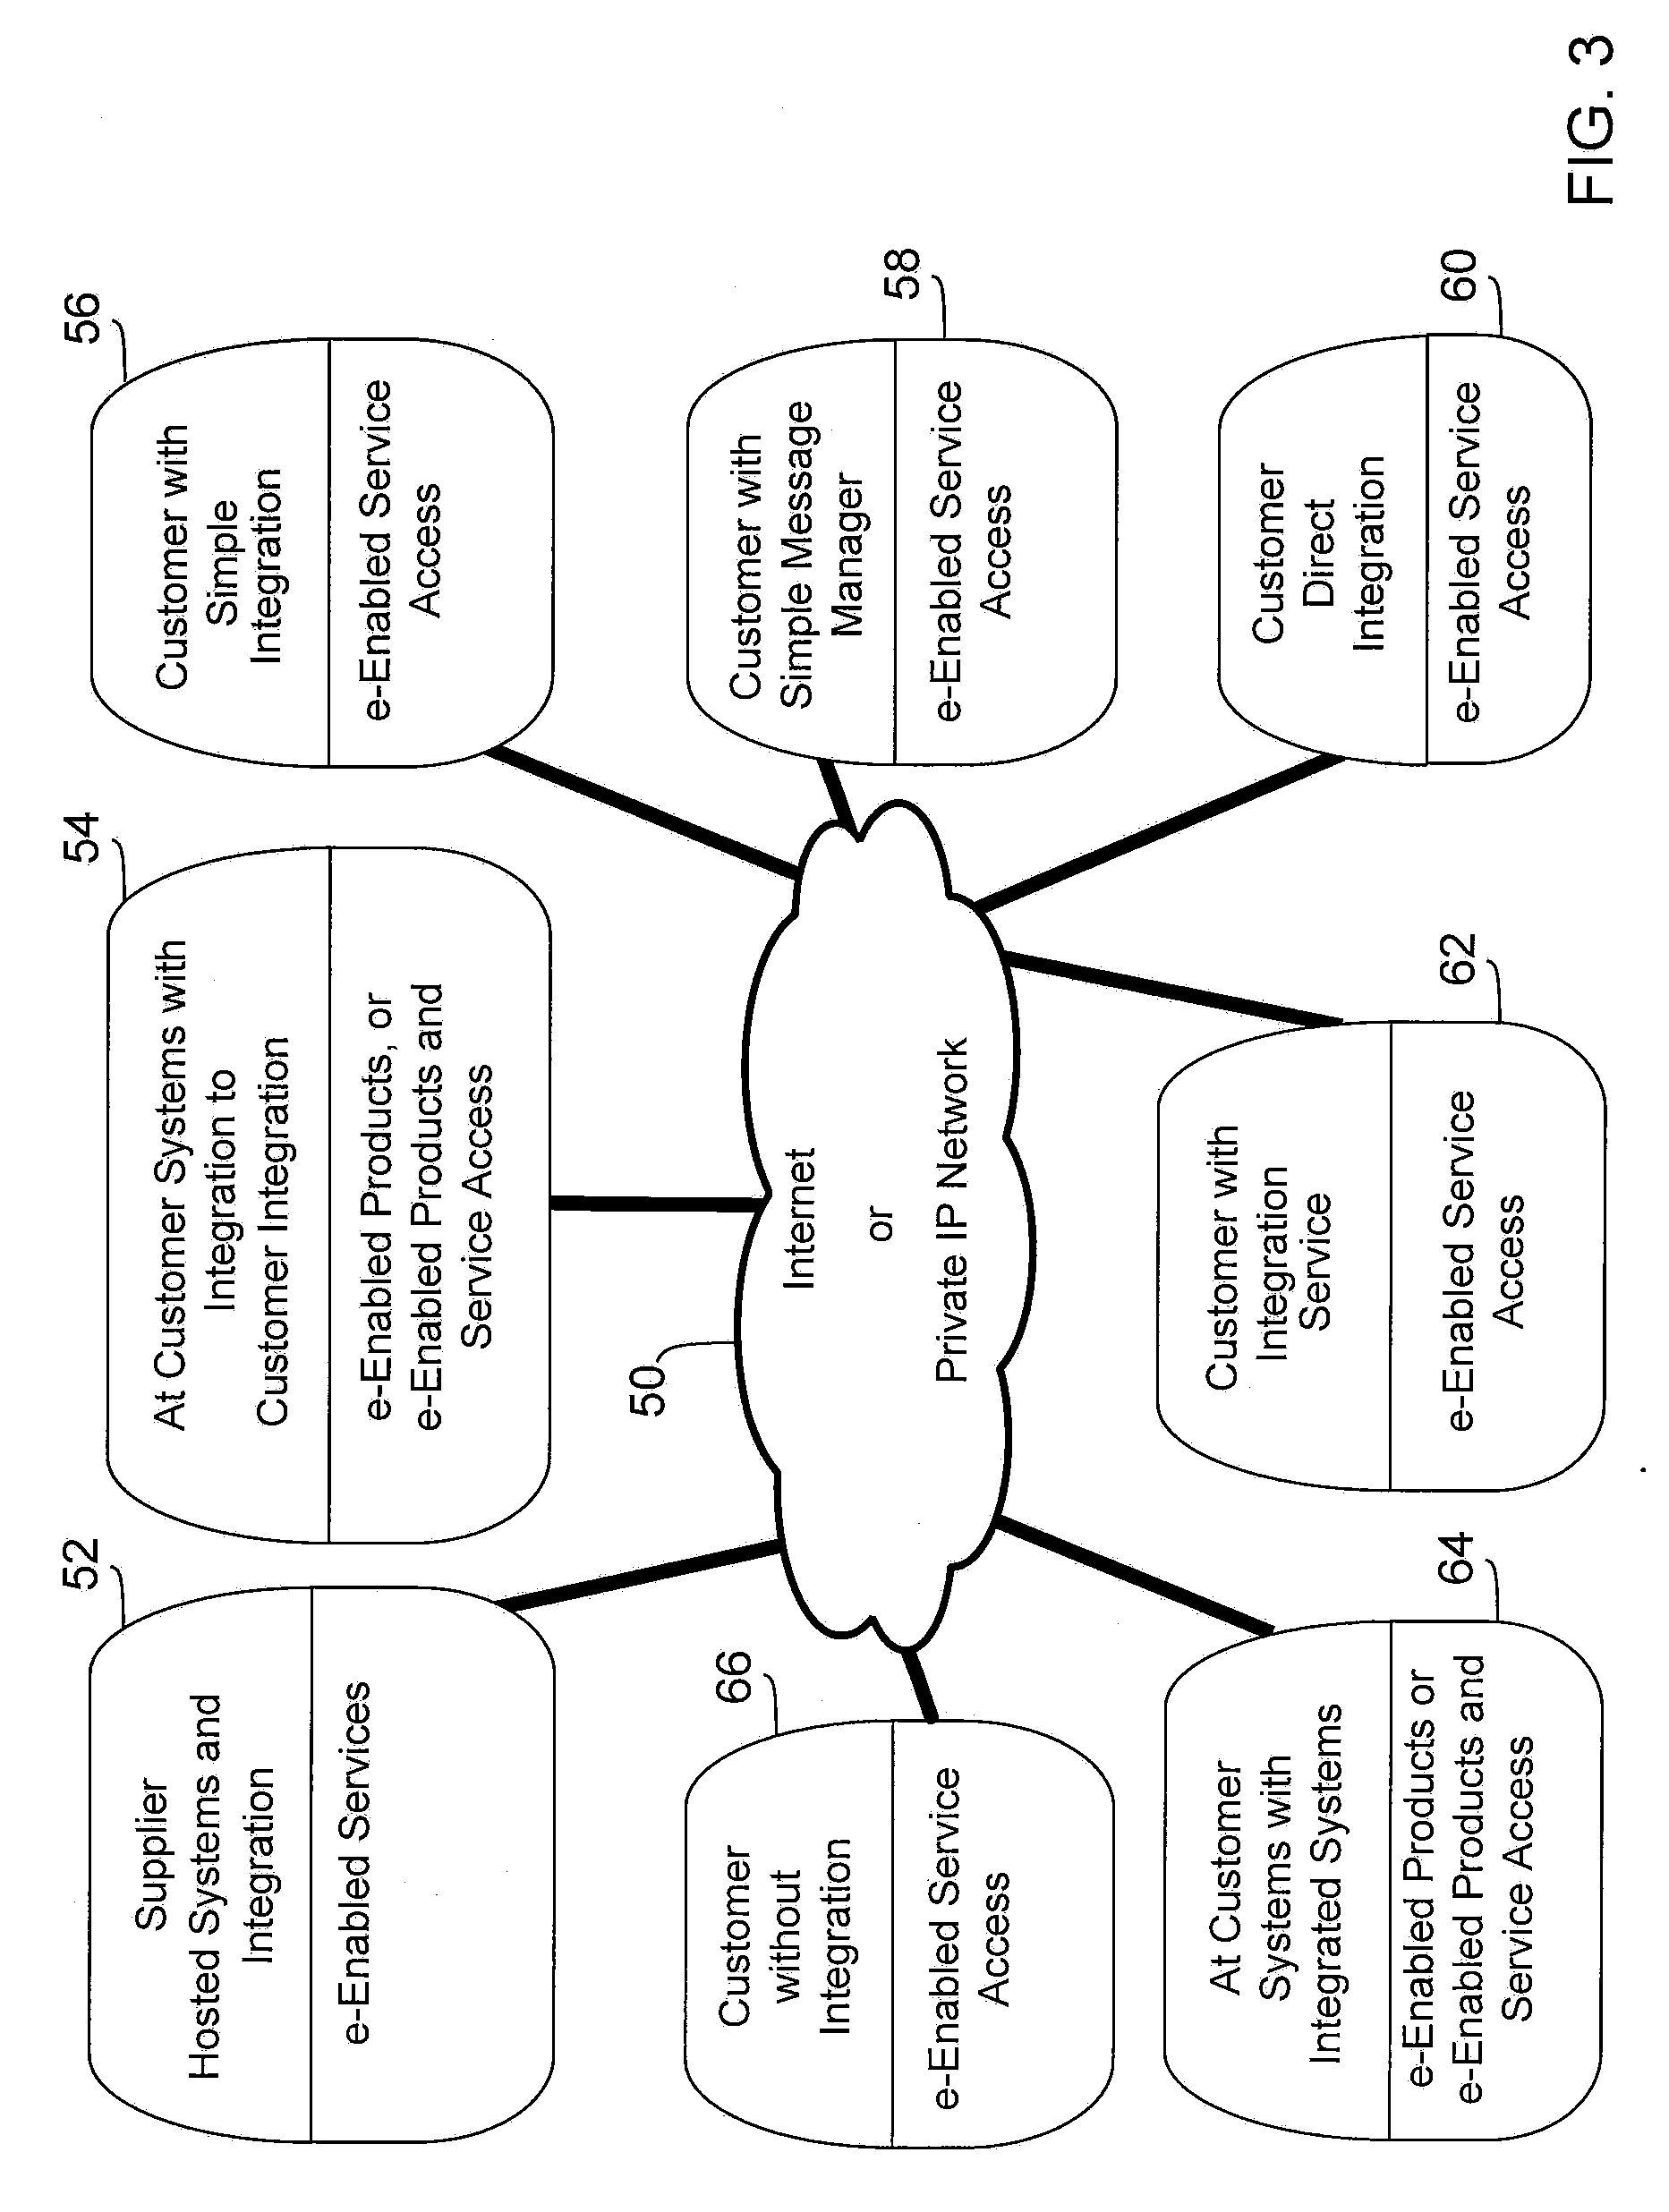 Methods and apparatus providing an e-enabled ground architecture